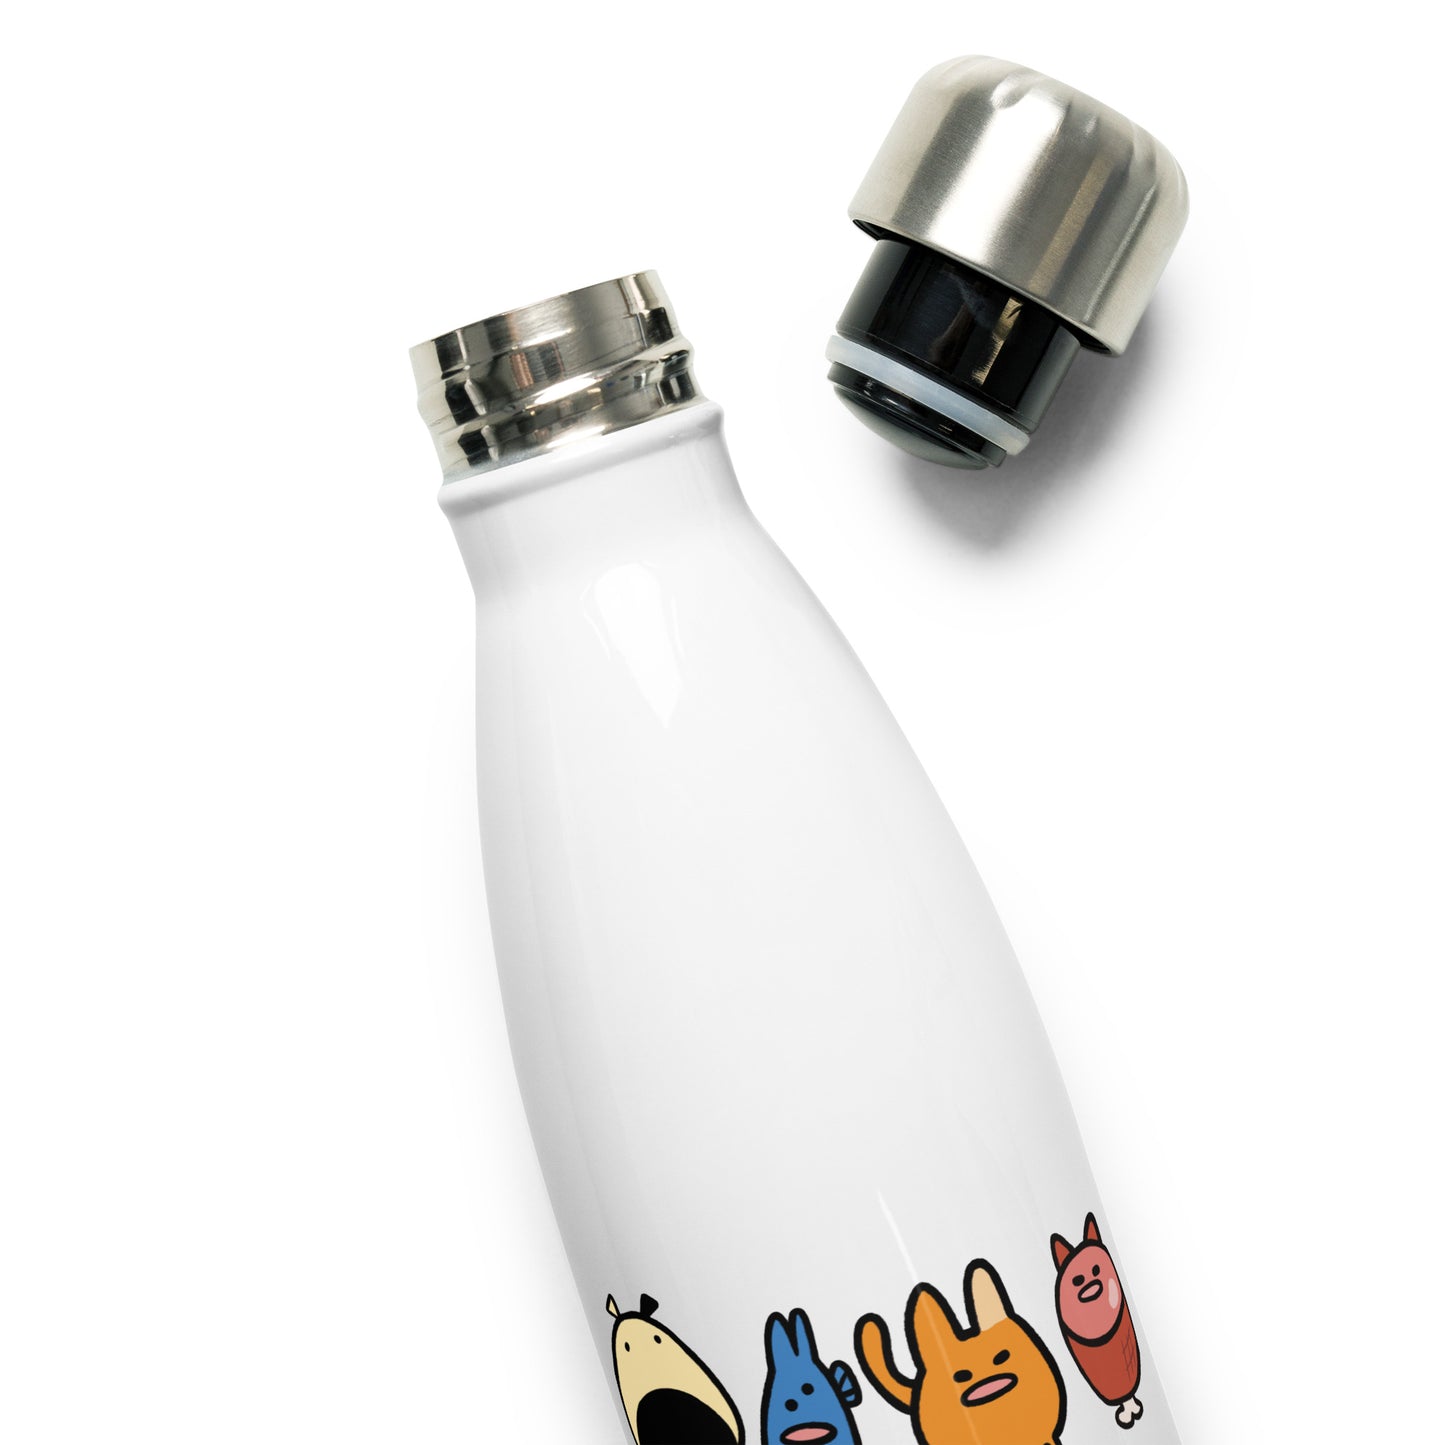 The Council Water Bottle